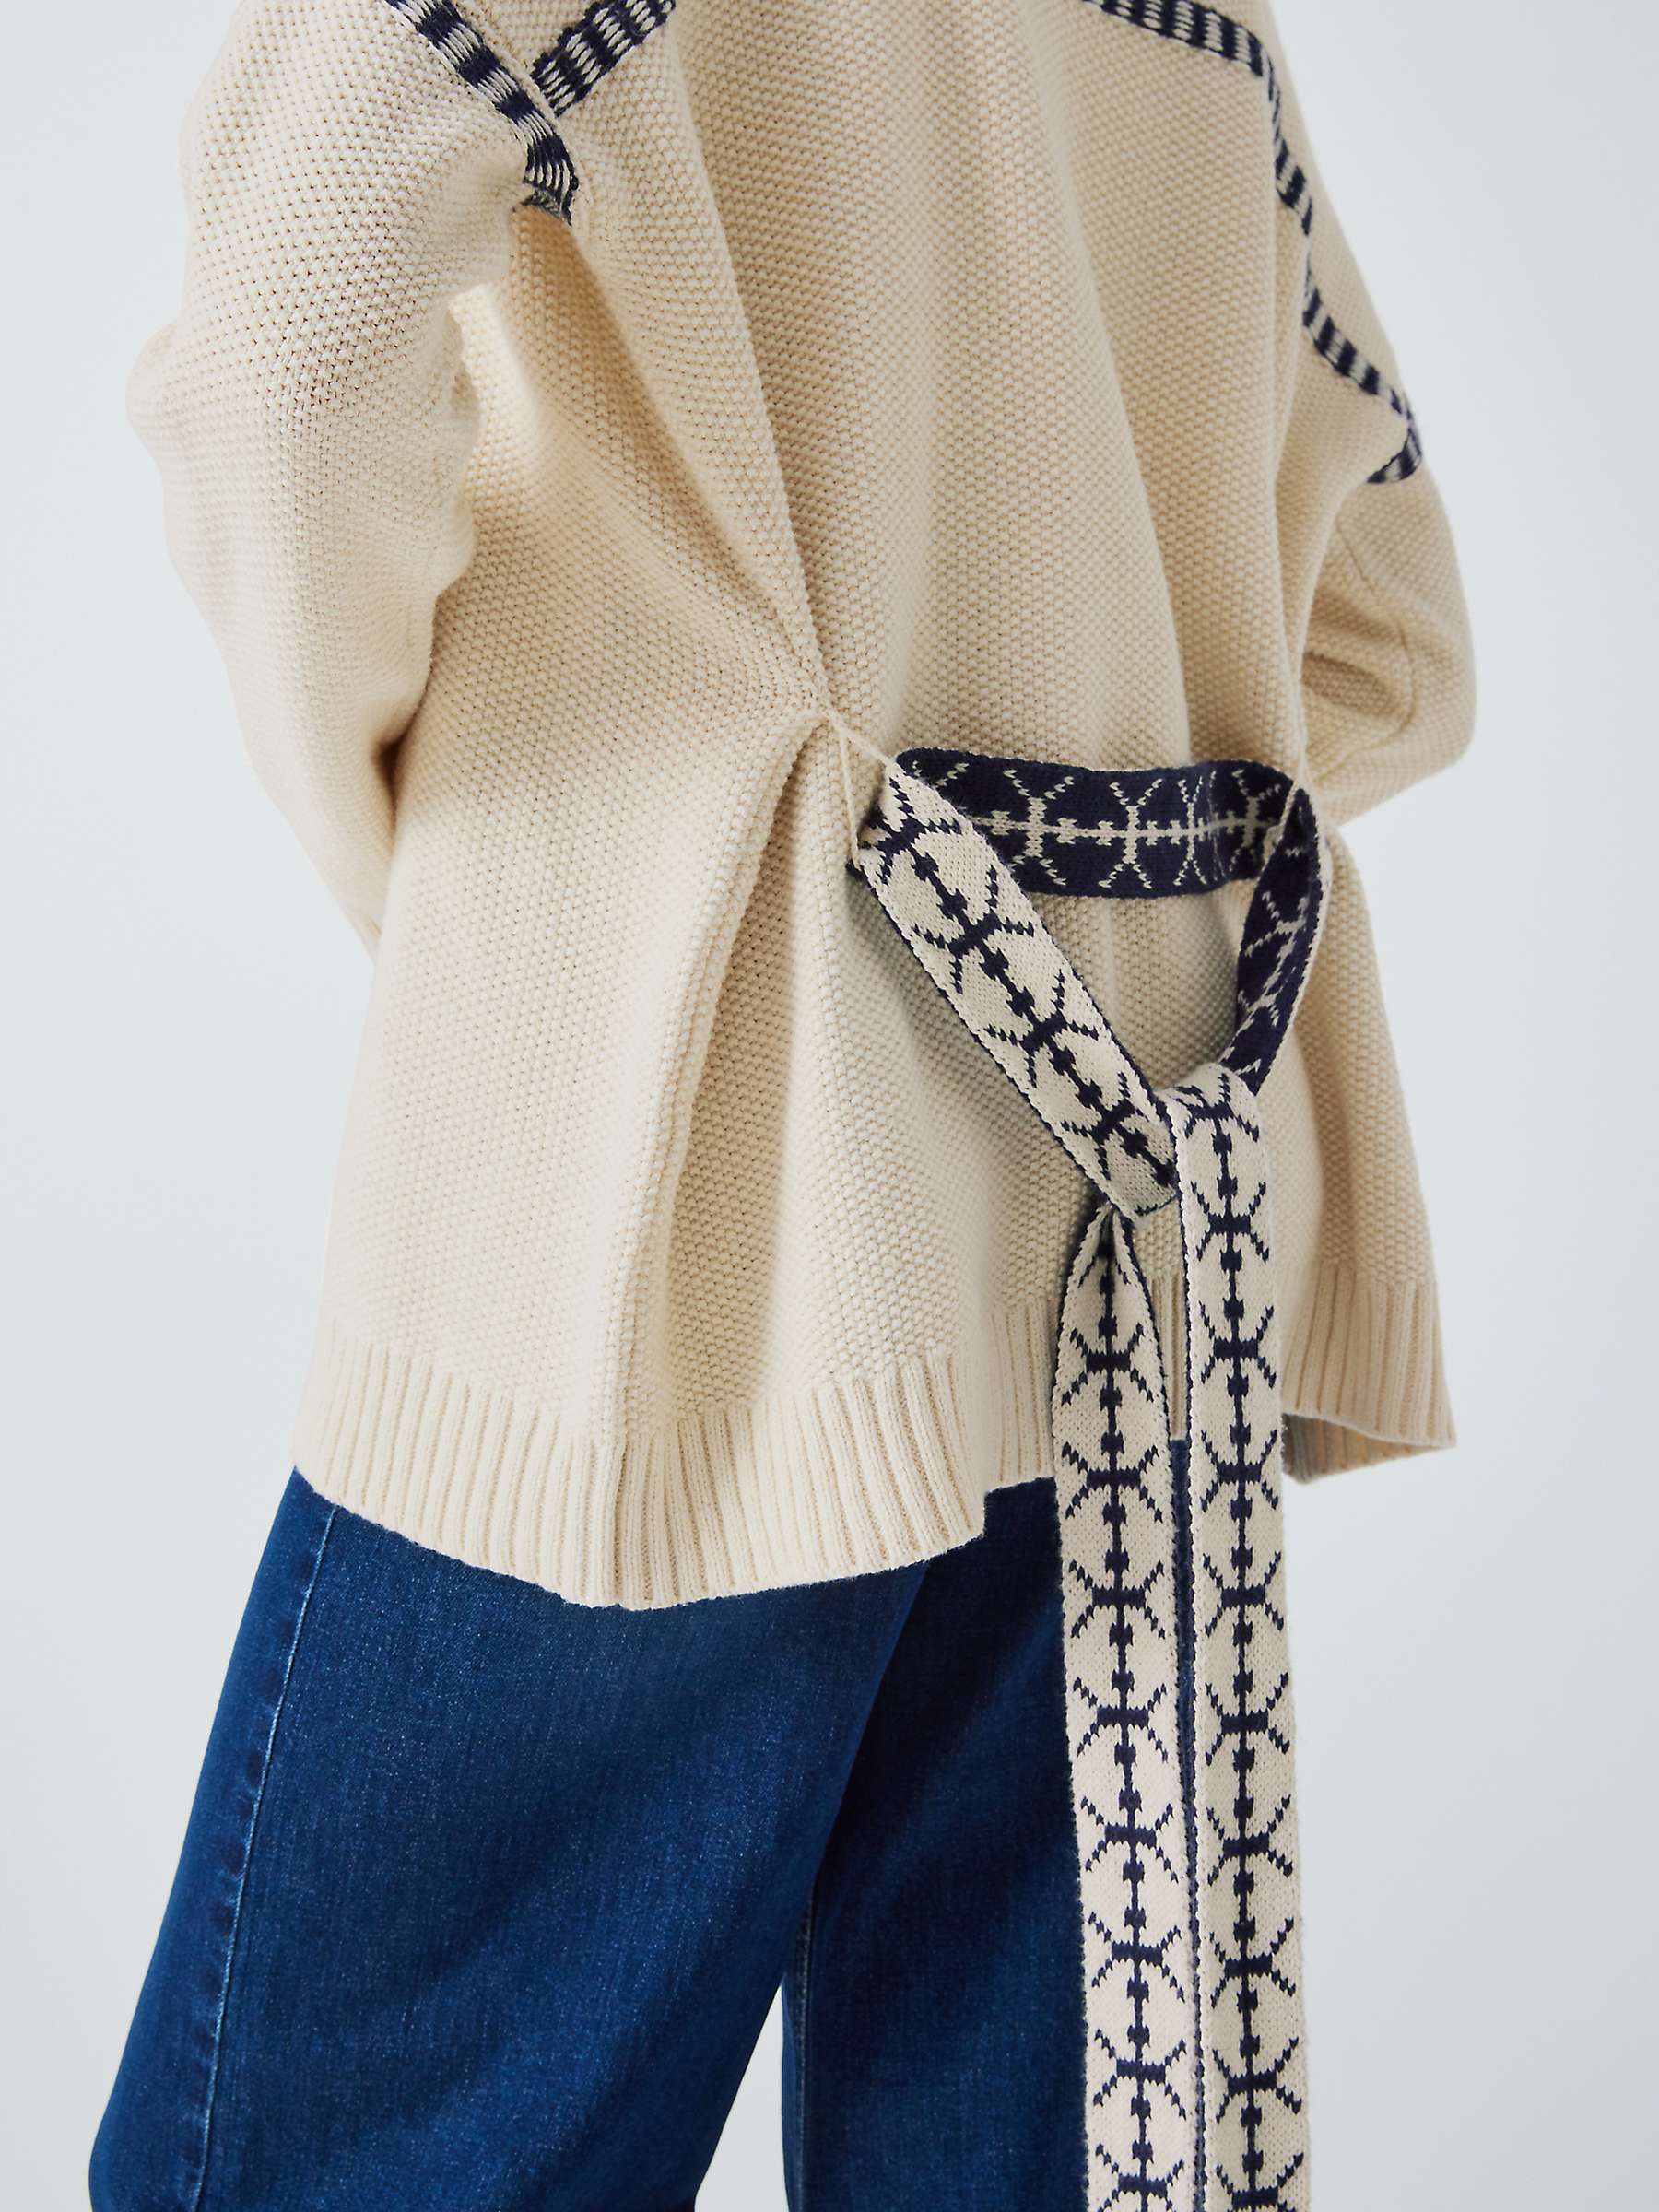 Buy AND/OR Belted Wool Blend Cardigan, Cream/Navy Online at johnlewis.com